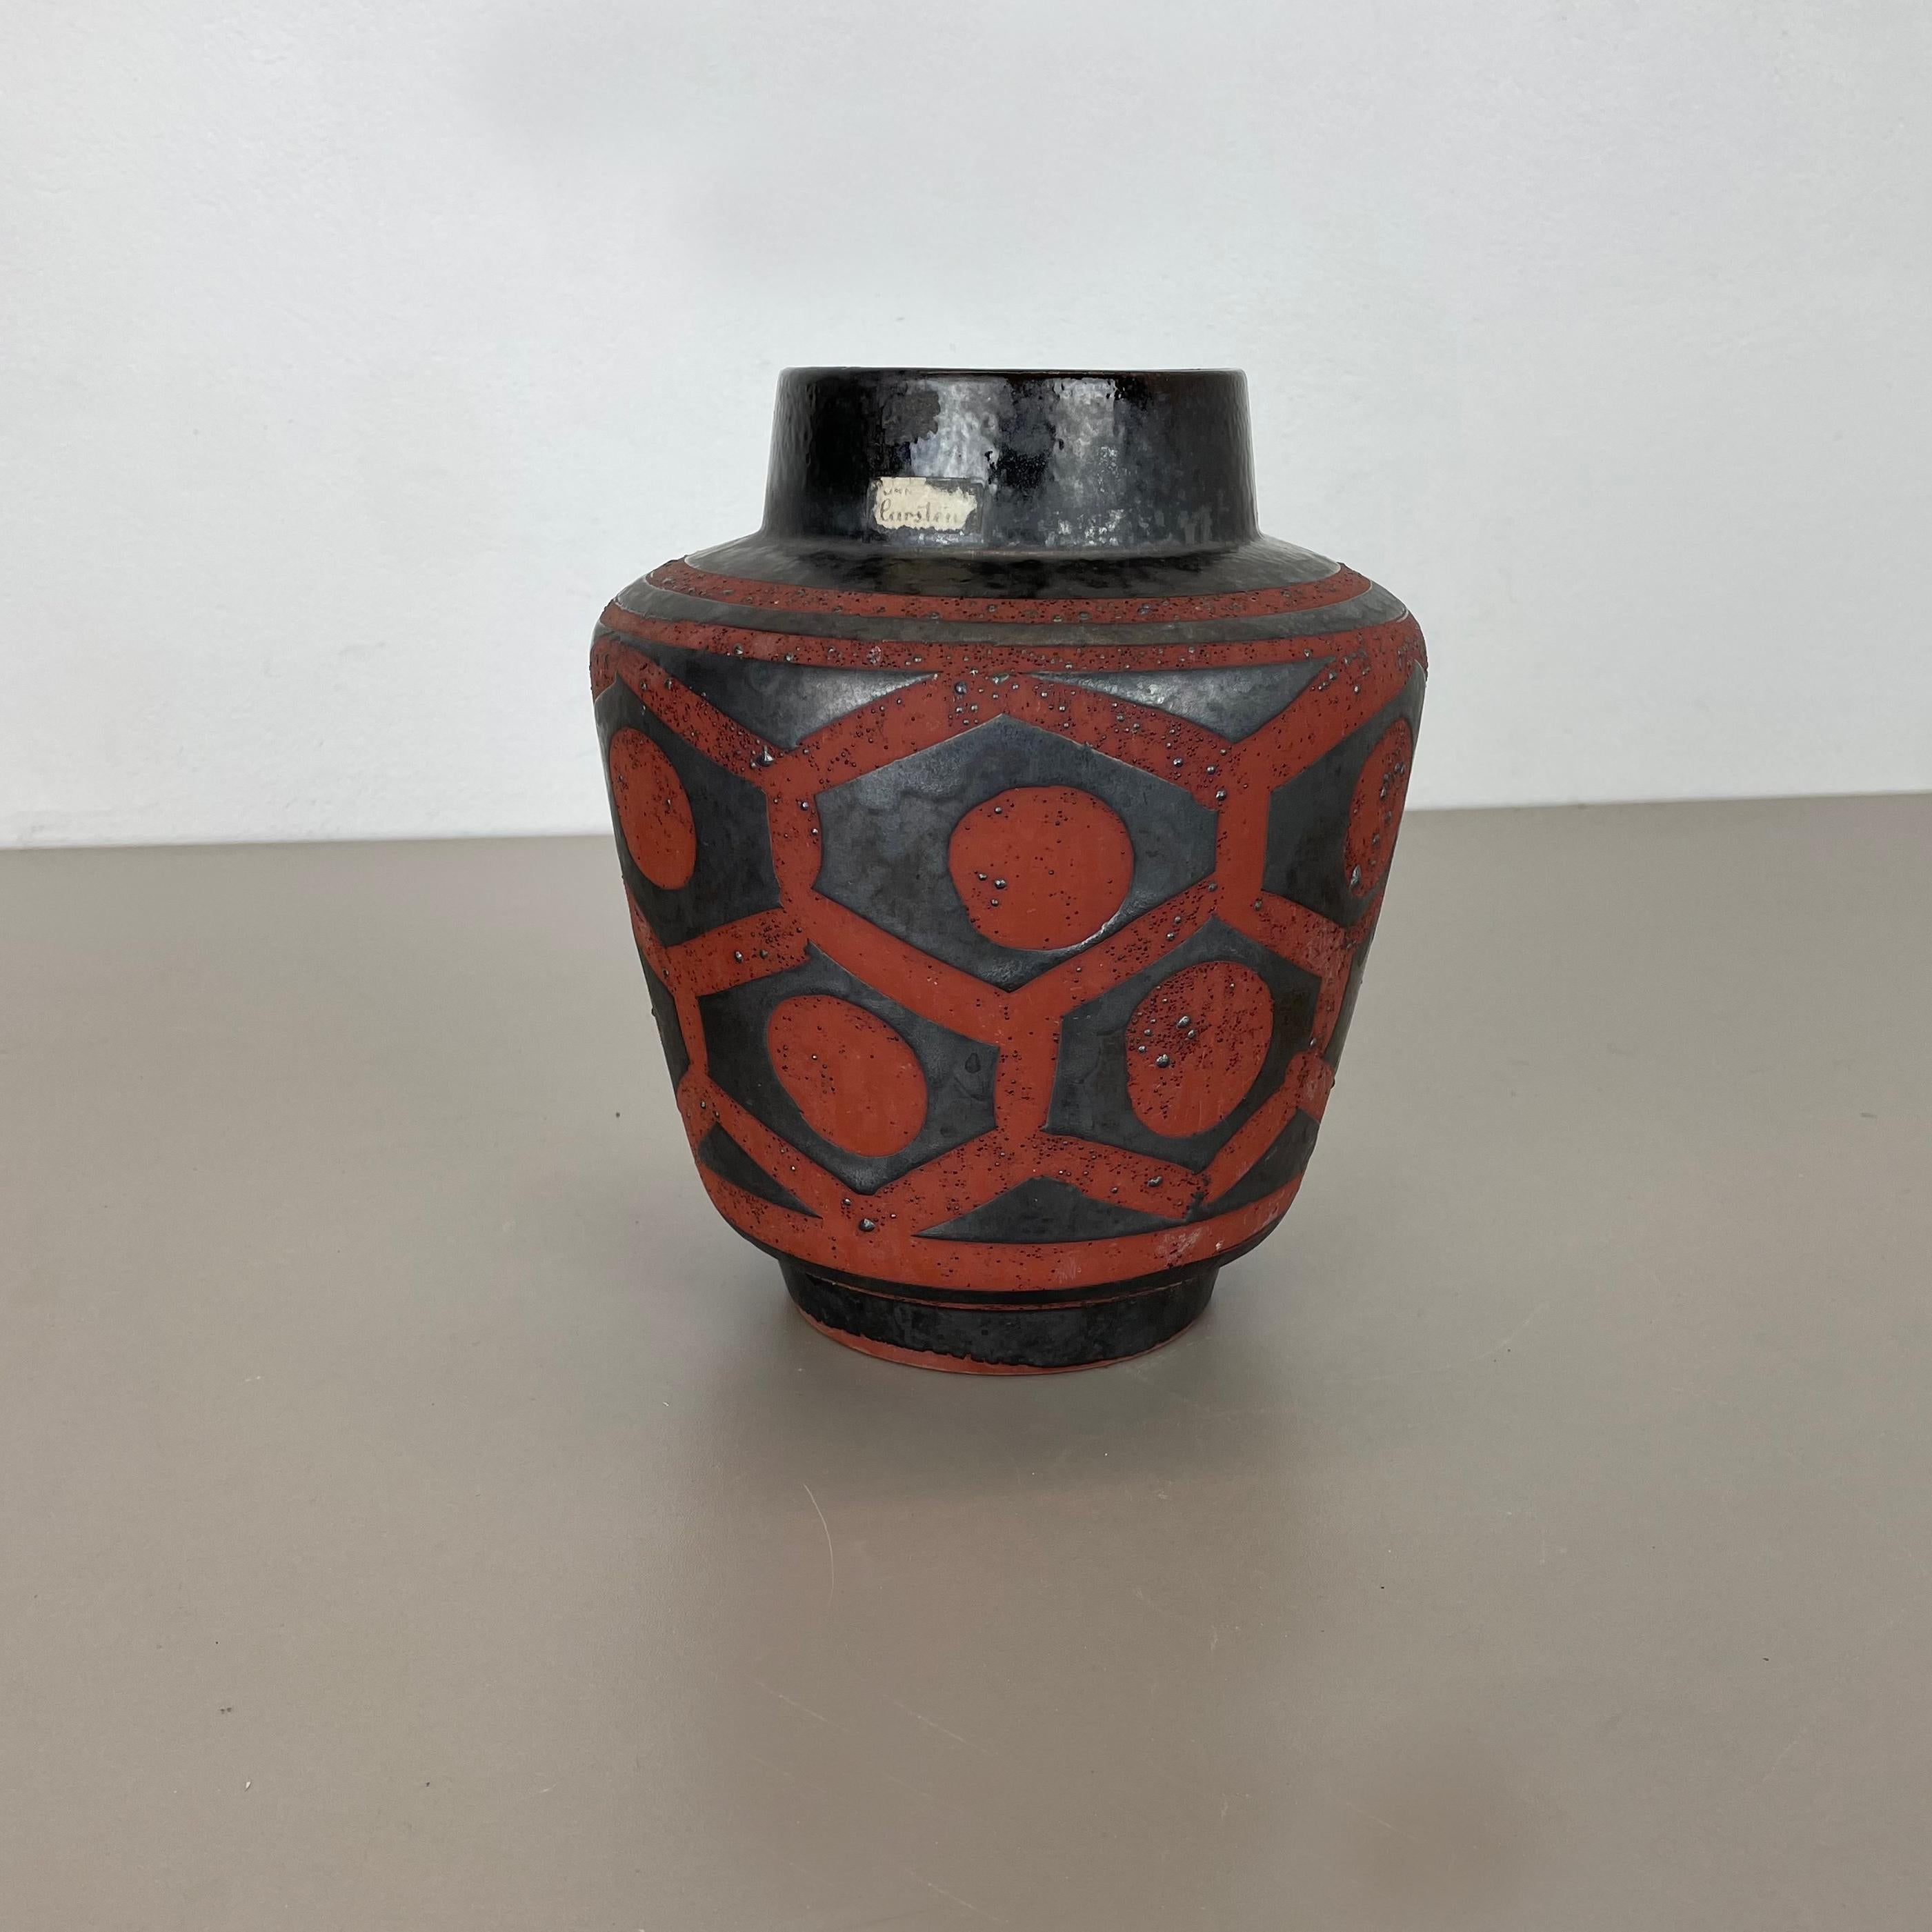 Article:

Ceramic pottery vase


Origin:

Germany


Designer:

Heinz Siery


Producer:

Carstens Tönnieshof, Germany


Decade:

1960s


This original vintage pottery object was designed by Heinz Siery and produced by Cartens